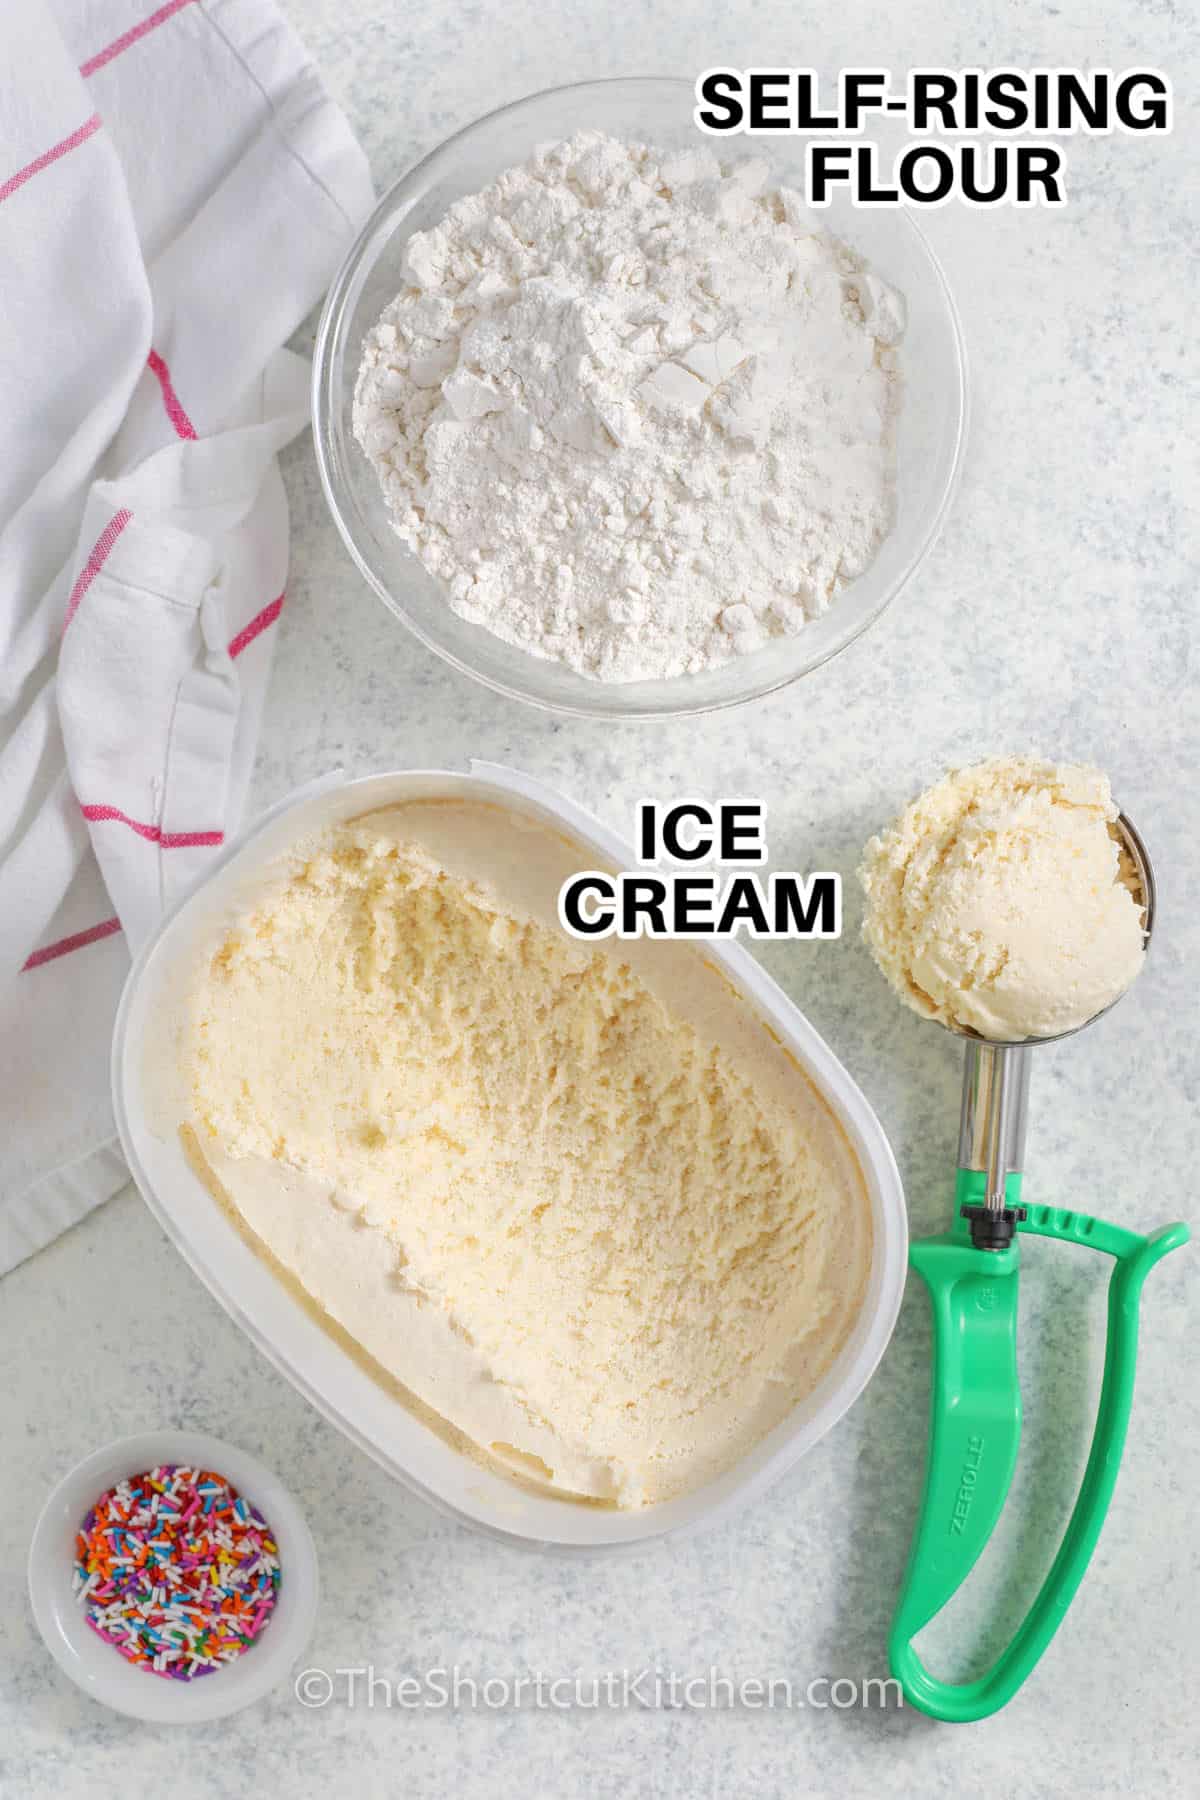 ice cream and self rising flour with labels to make Ice Cream Bread Recipe